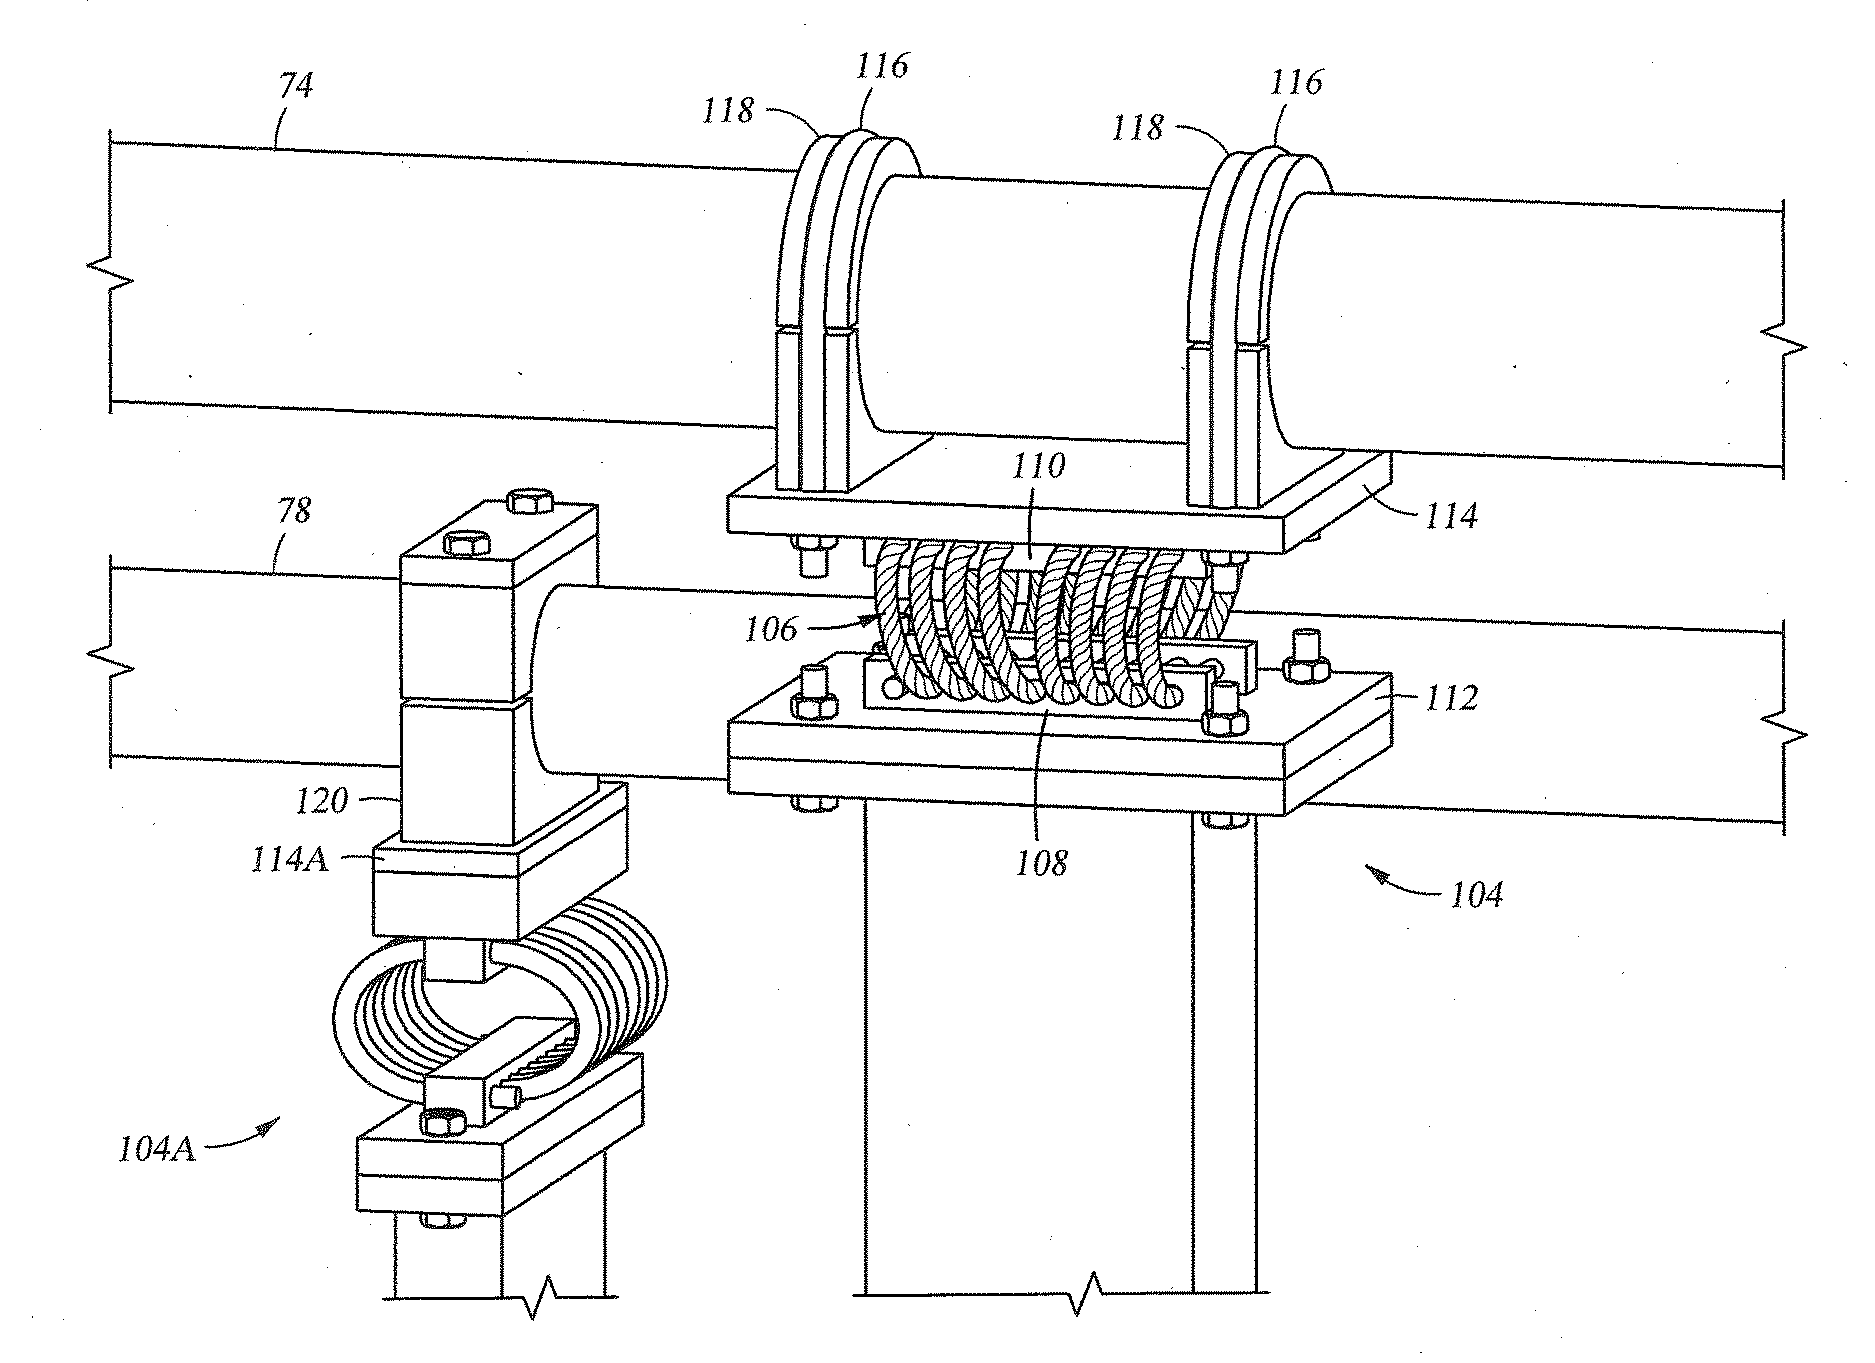 System for Reducing Vibrations in a Pressure Pumping Fleet